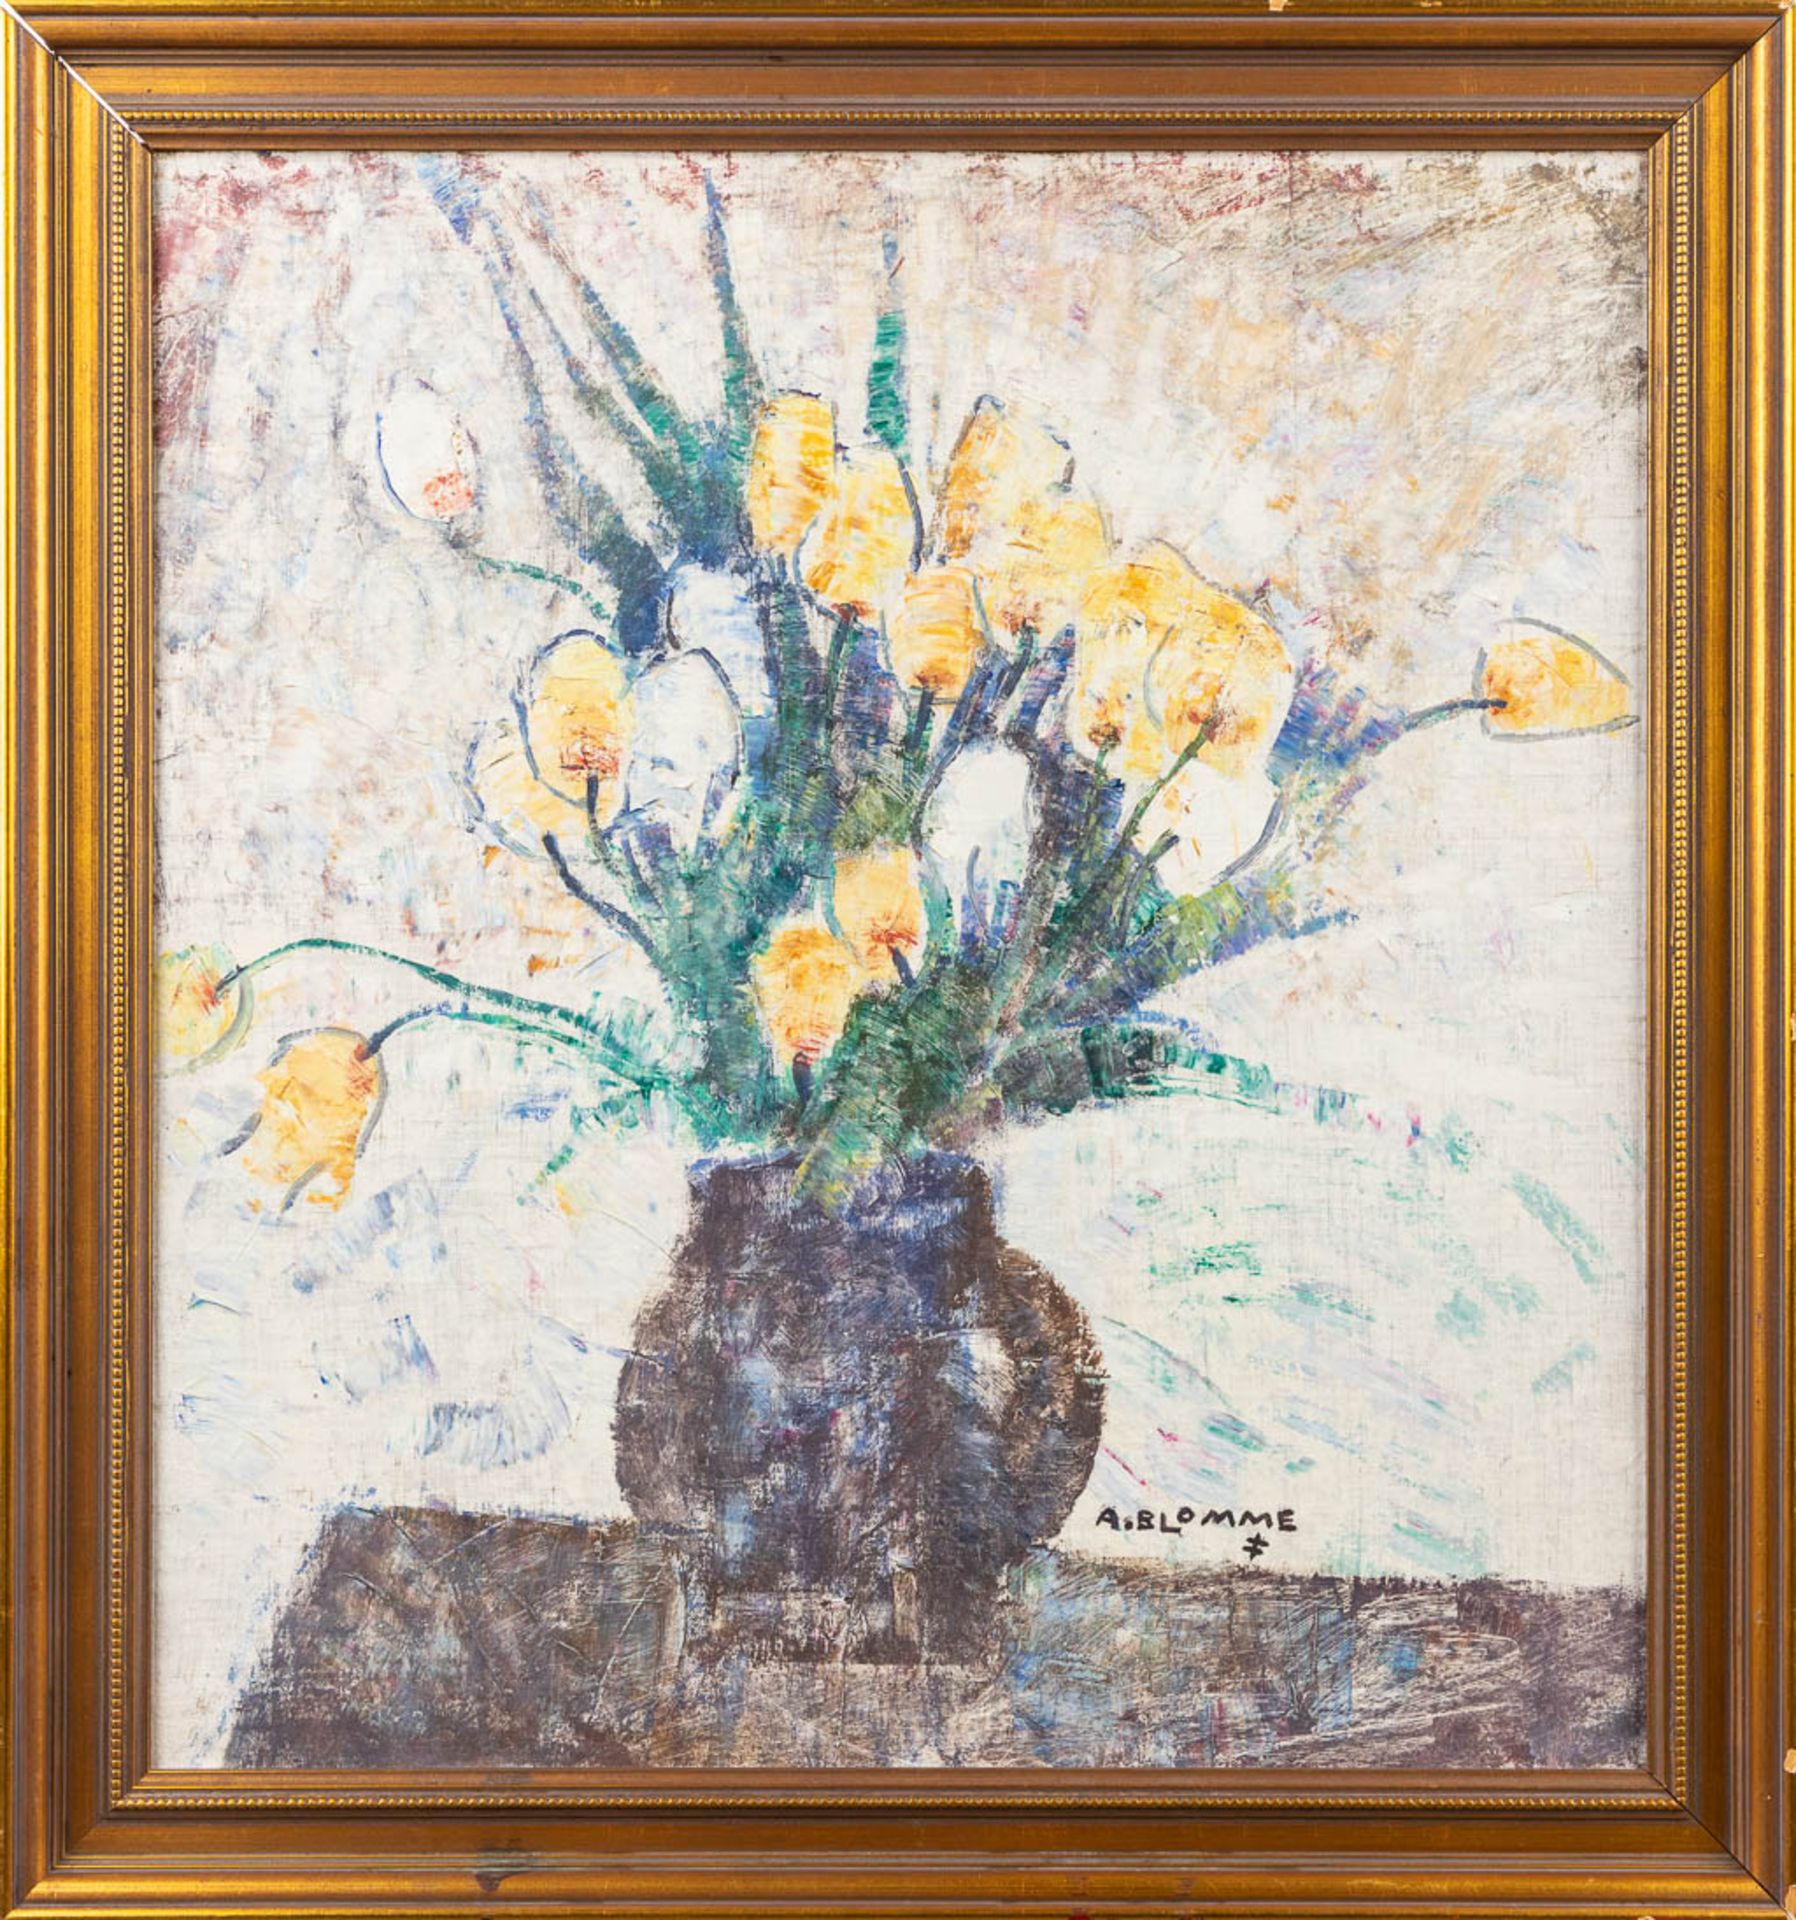 Alfons BLOMME (1889-1979) 'Tulips' oil on canvas. (56 x 60cm) - Image 3 of 6